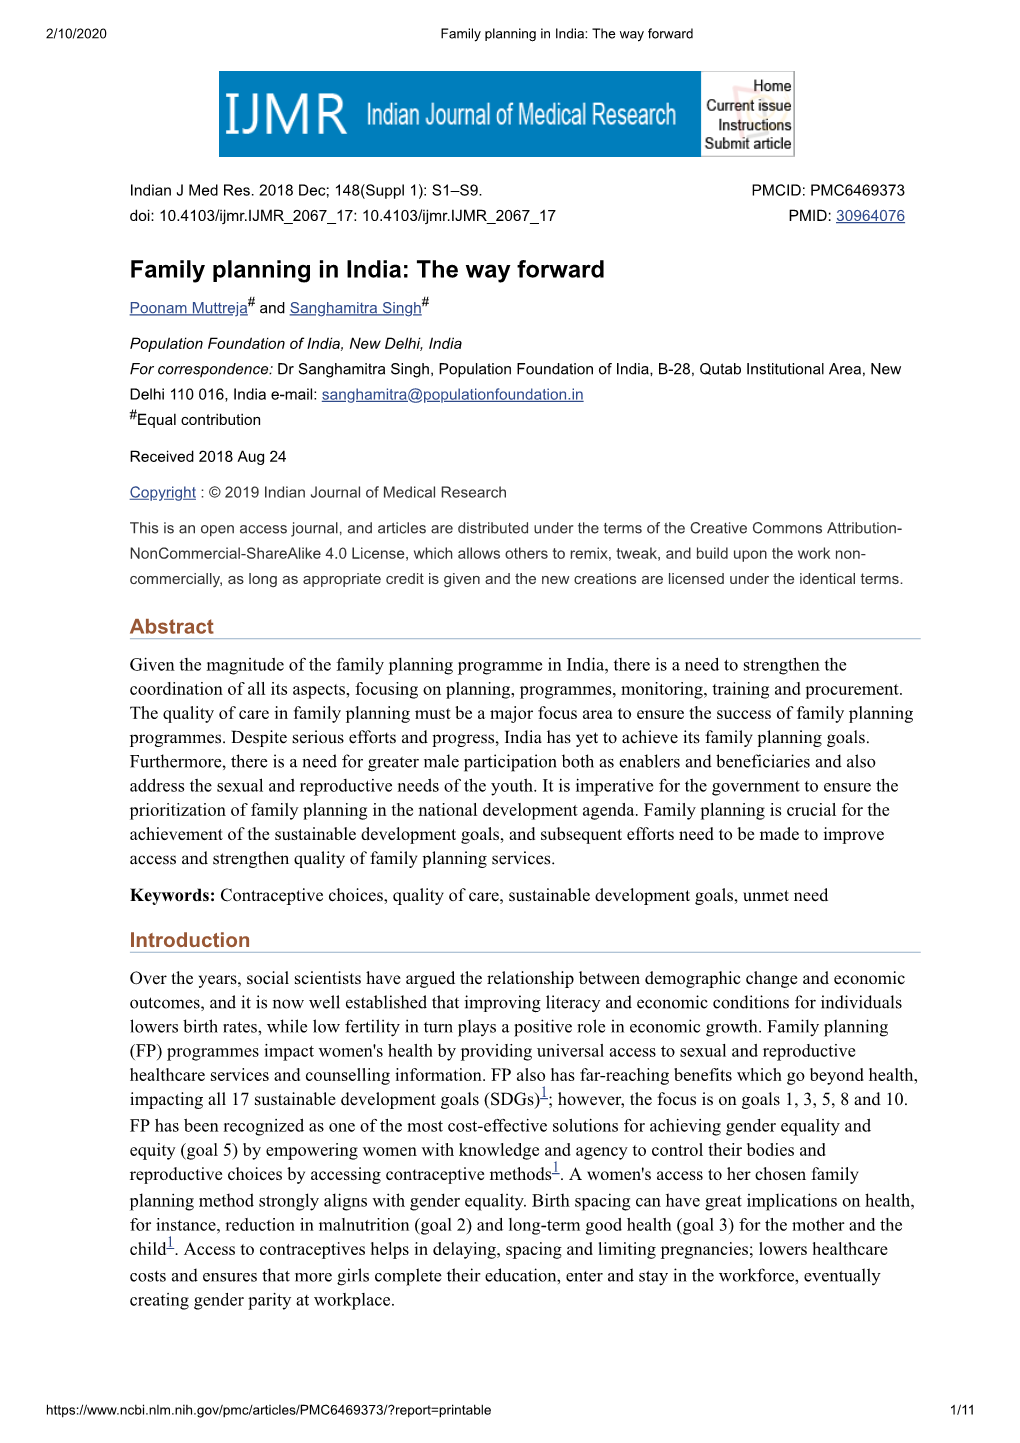 Family Planning in India: the Way Forward